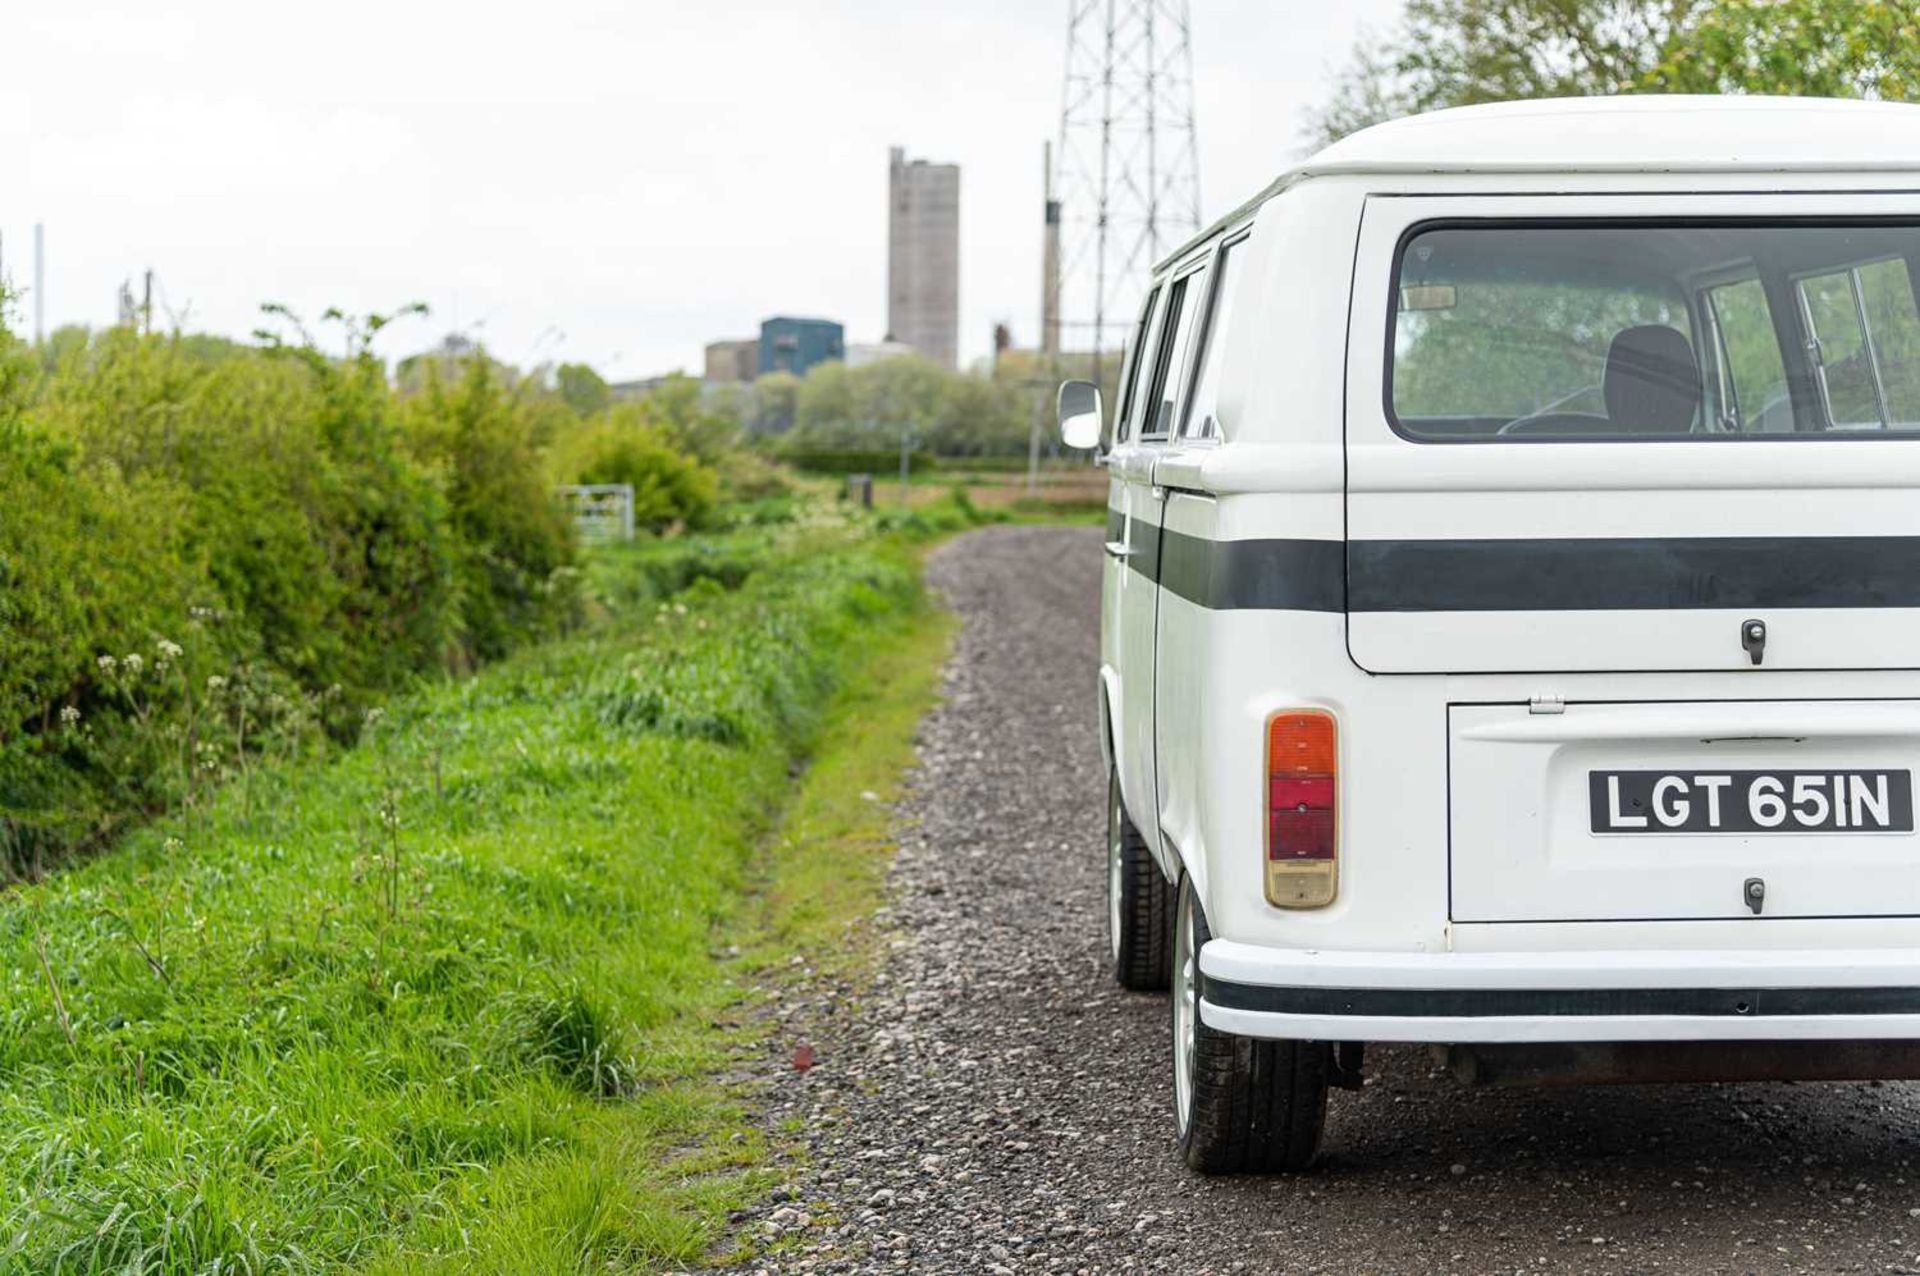 1975 VW T2 Transporter Recently repatriated from the car-friendly climate of South Africa - Image 8 of 60